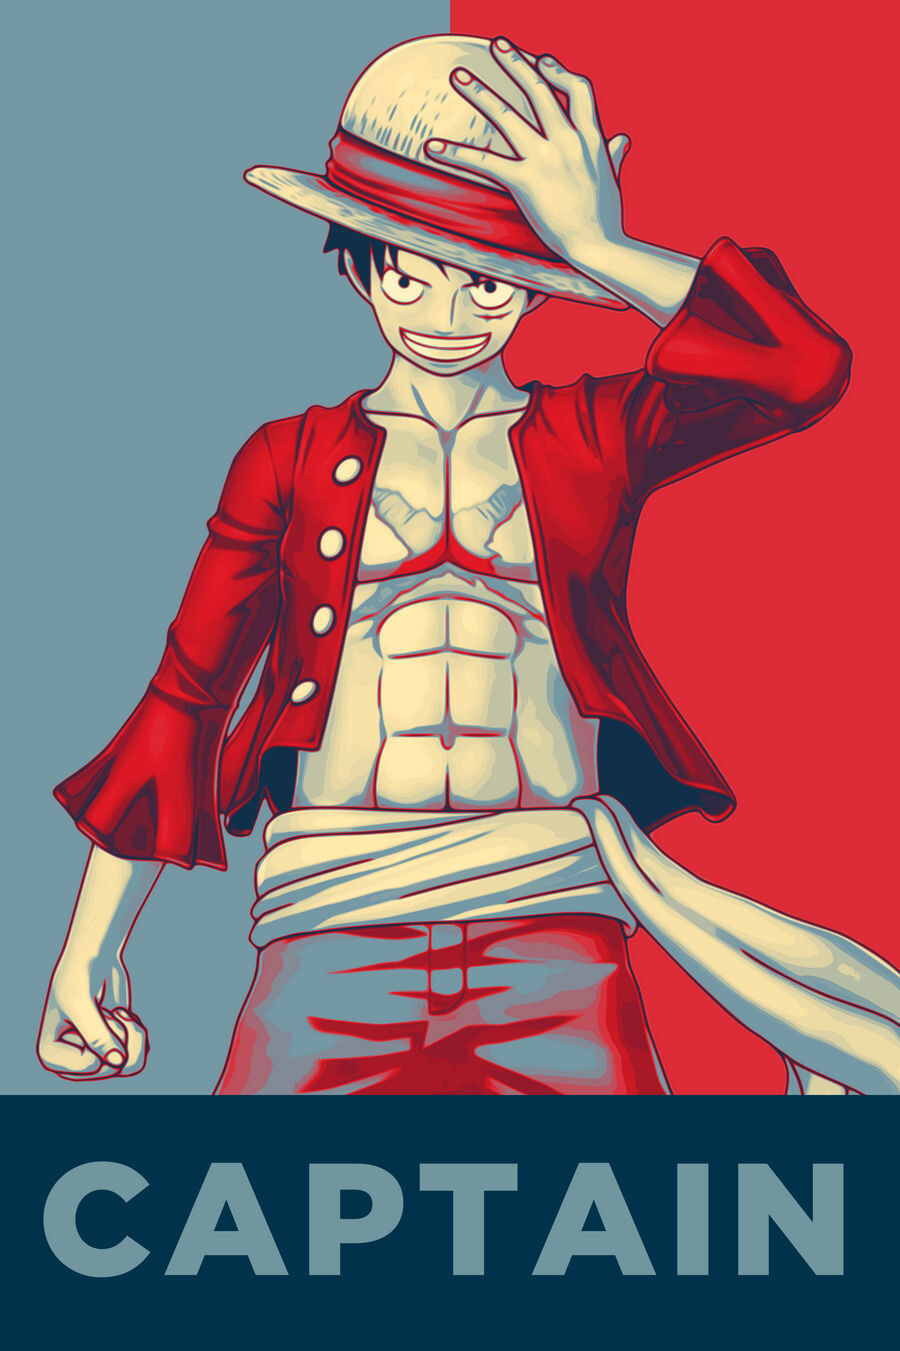 ArtStation - One Piece Posters